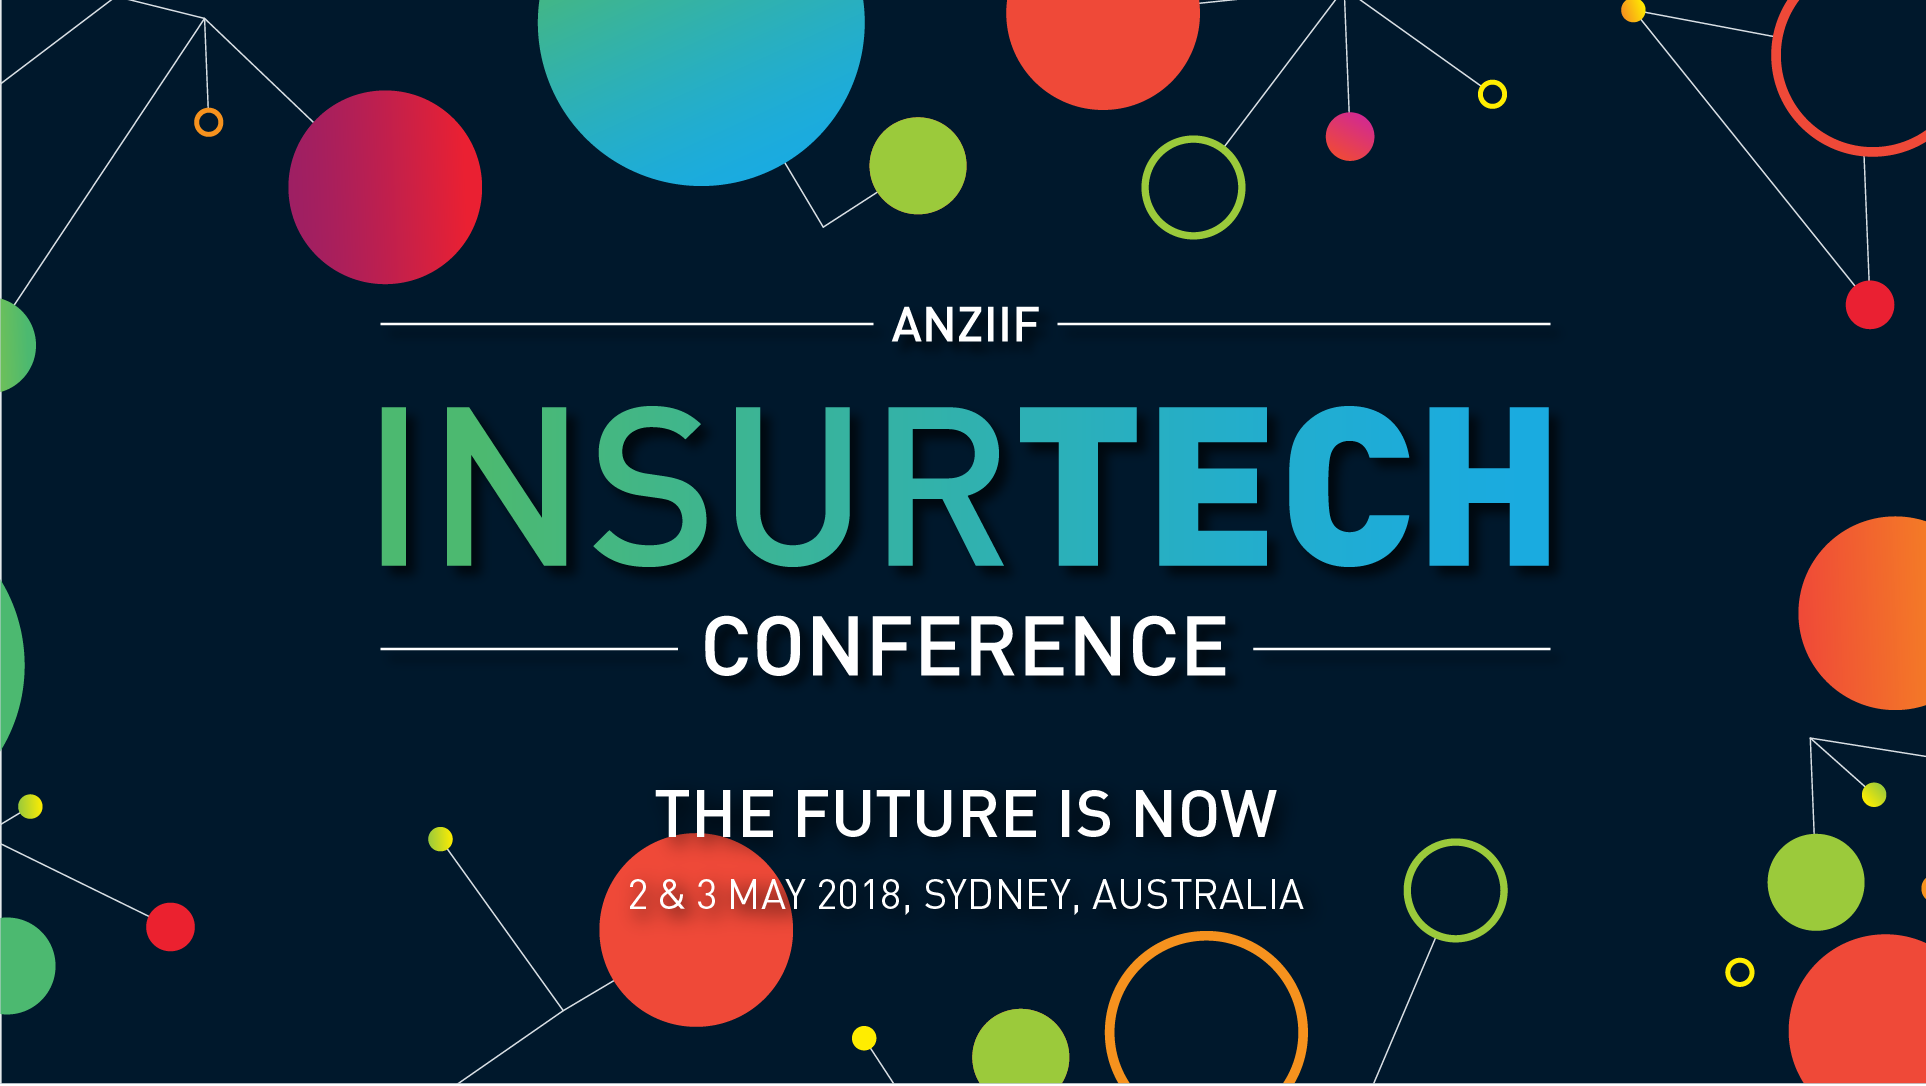 Insurtech Conference with ANZIIF and Insurtech Australia